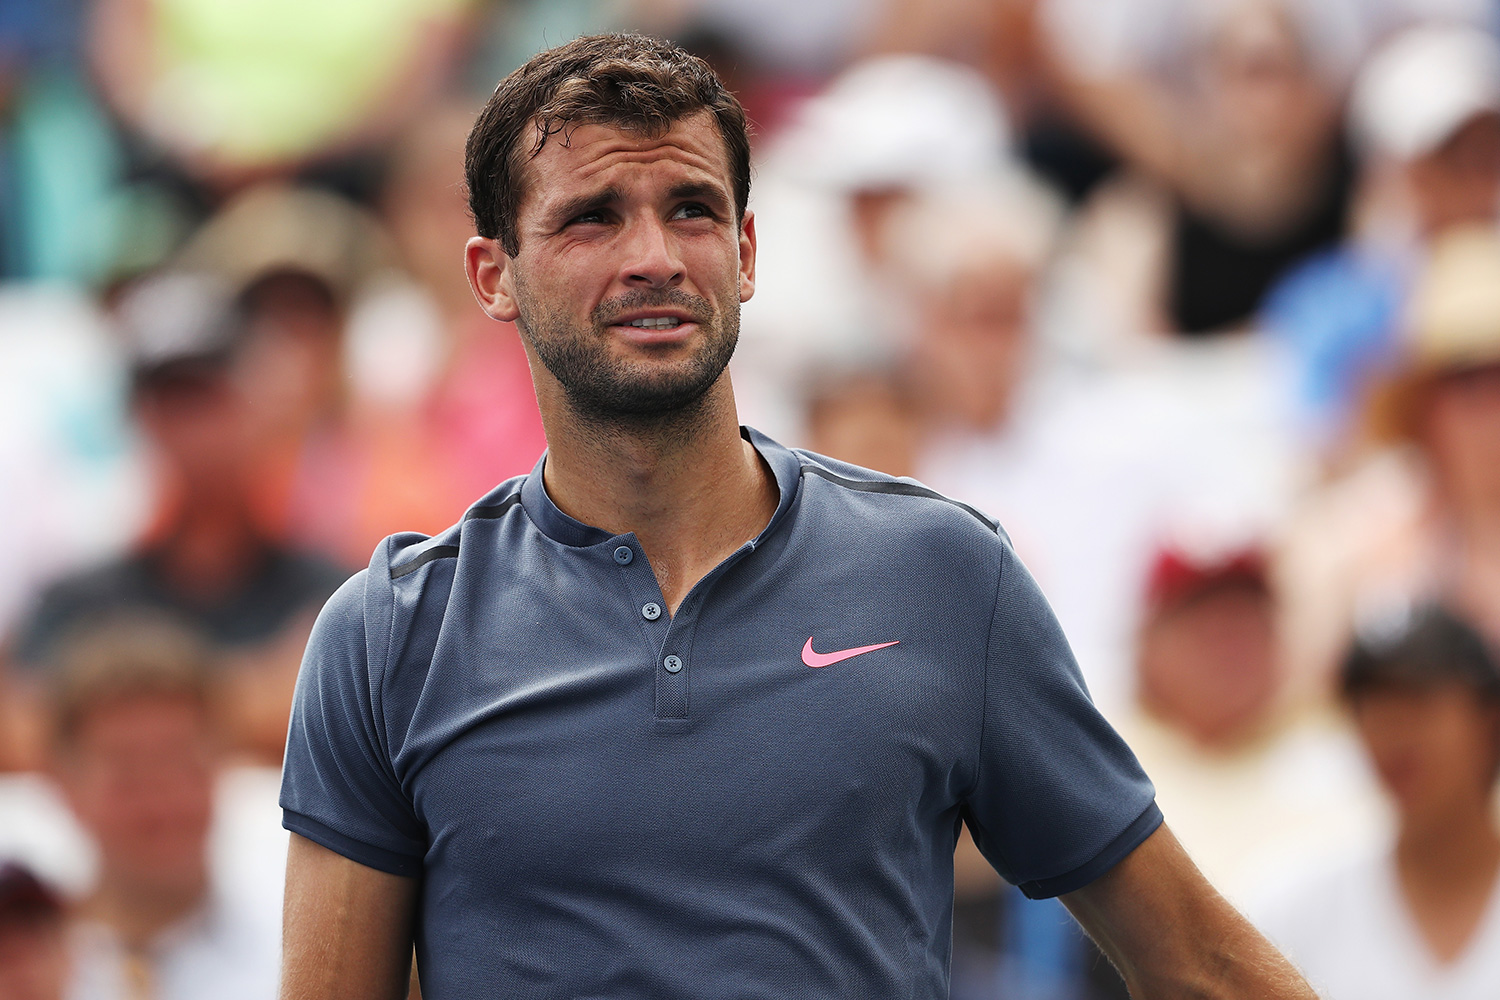 Cincinnati champion Grigor Dimitrov crashed out in straight sets against An...